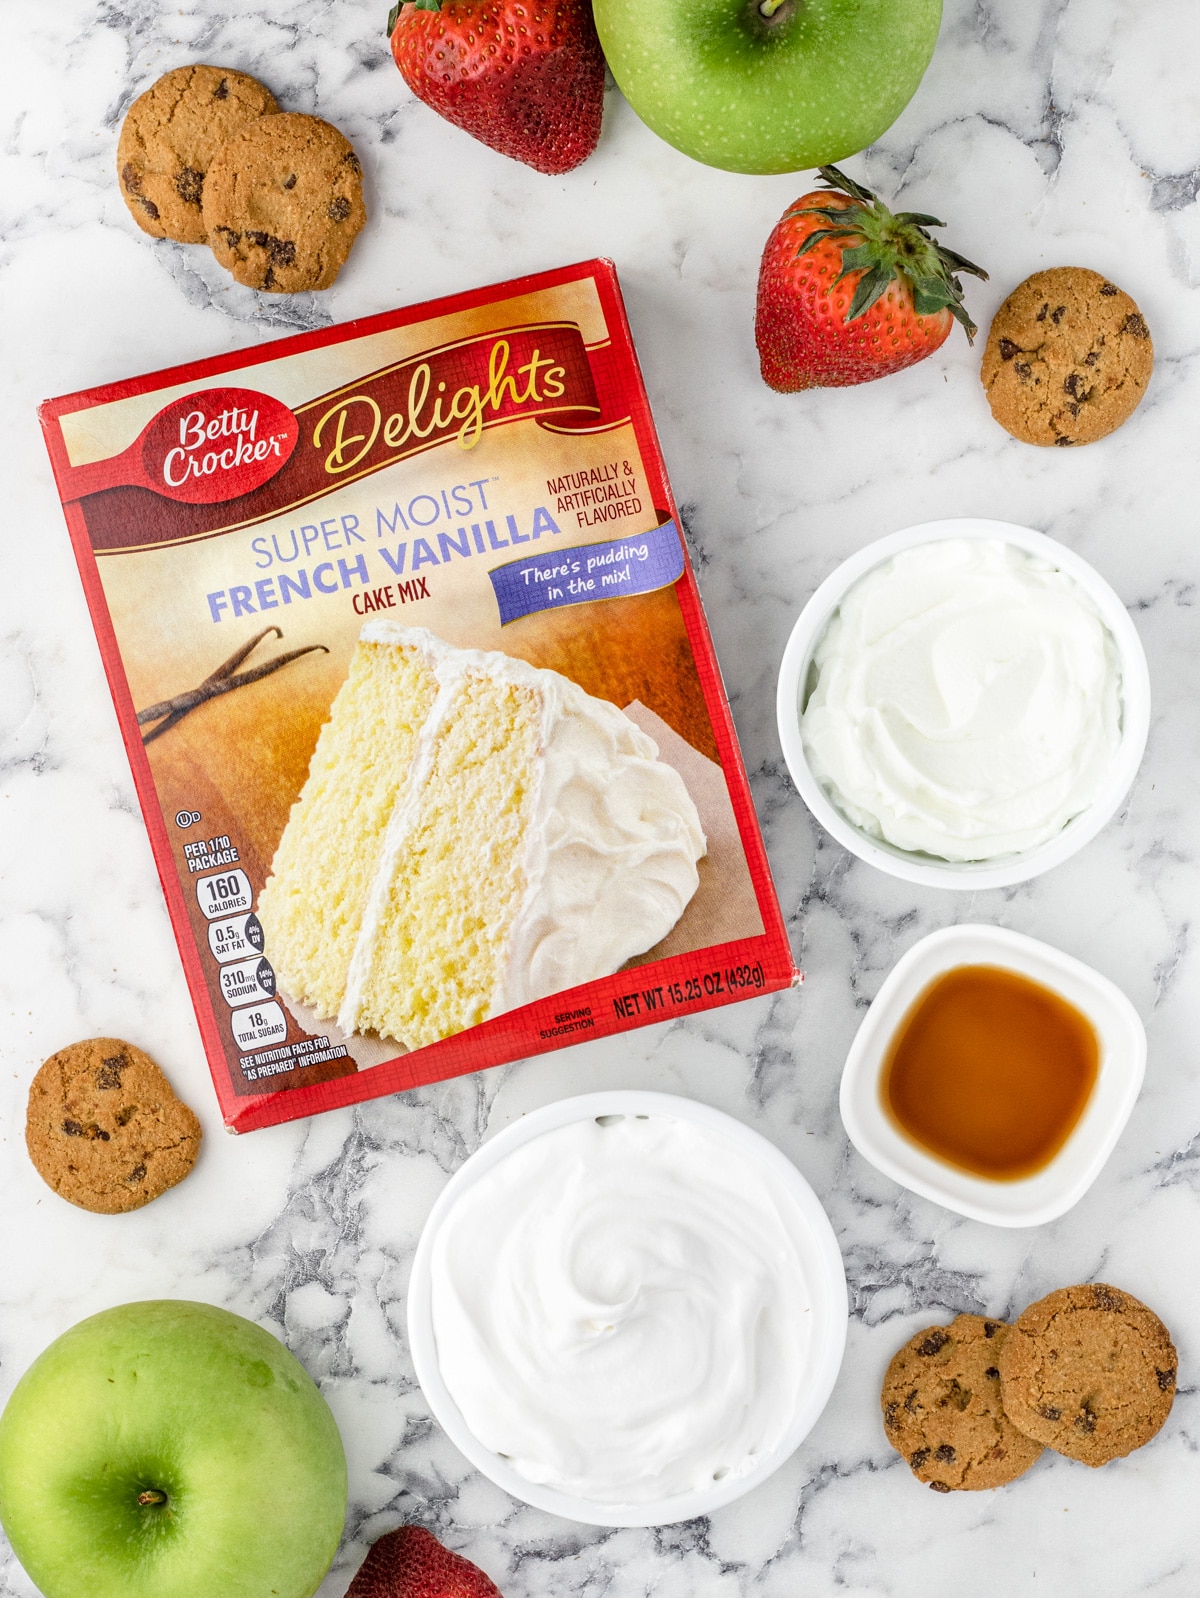 Ingredients: box of vanilla cake mix, Greek yogurt, whipped cream, and vanilla extract. With chocolate chip cookies, whole apples, and whole strawberries on the side.